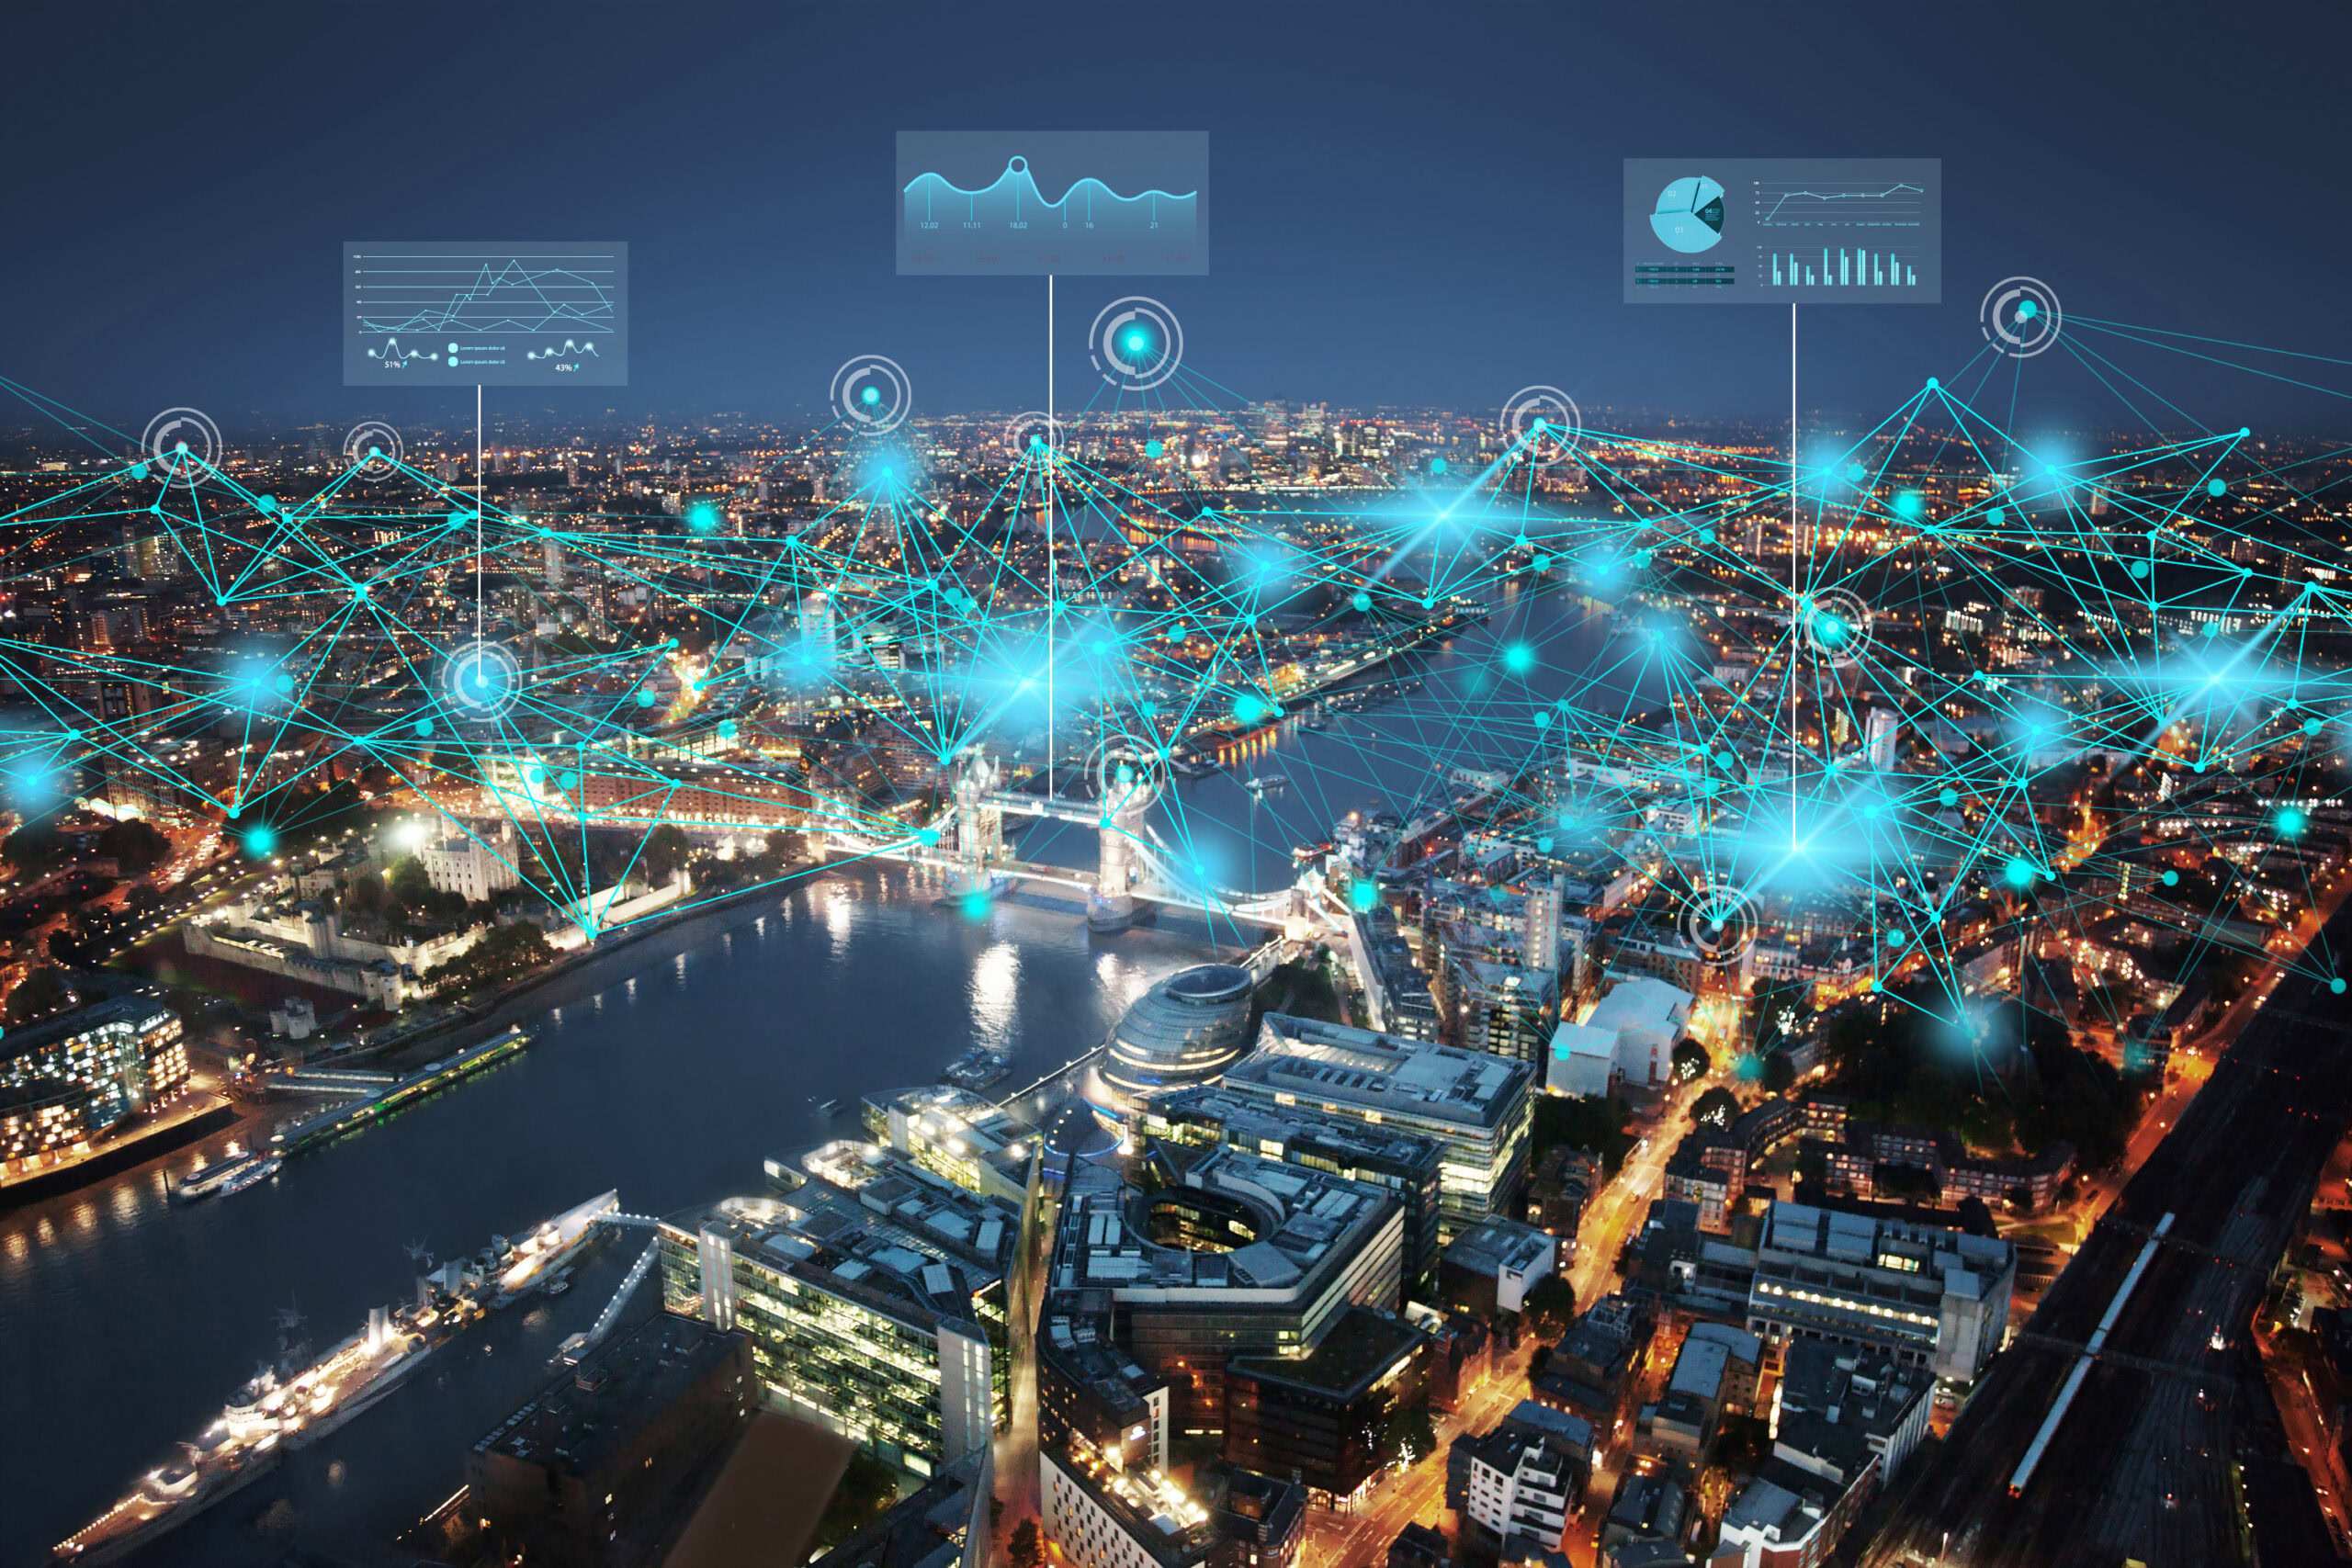 Aerial view of a digitally connected London at night with interconnected lines and data visuals overlaying the scene, symbolizing network connectivity and data exchange.